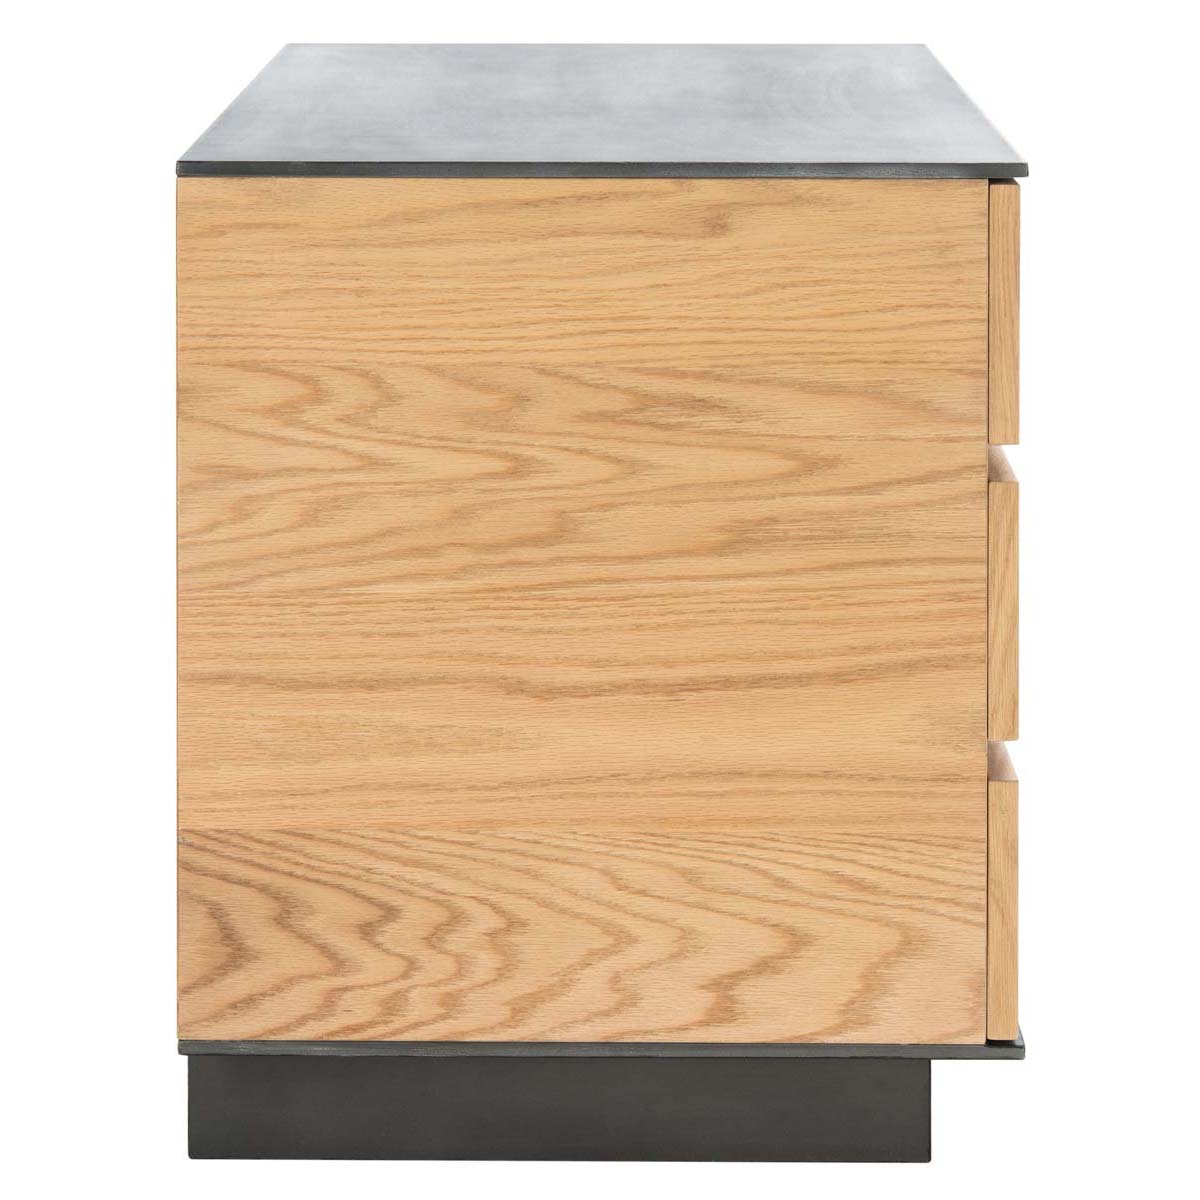 Safavieh Couture Poe 3 Drawer Nightstand - Natural